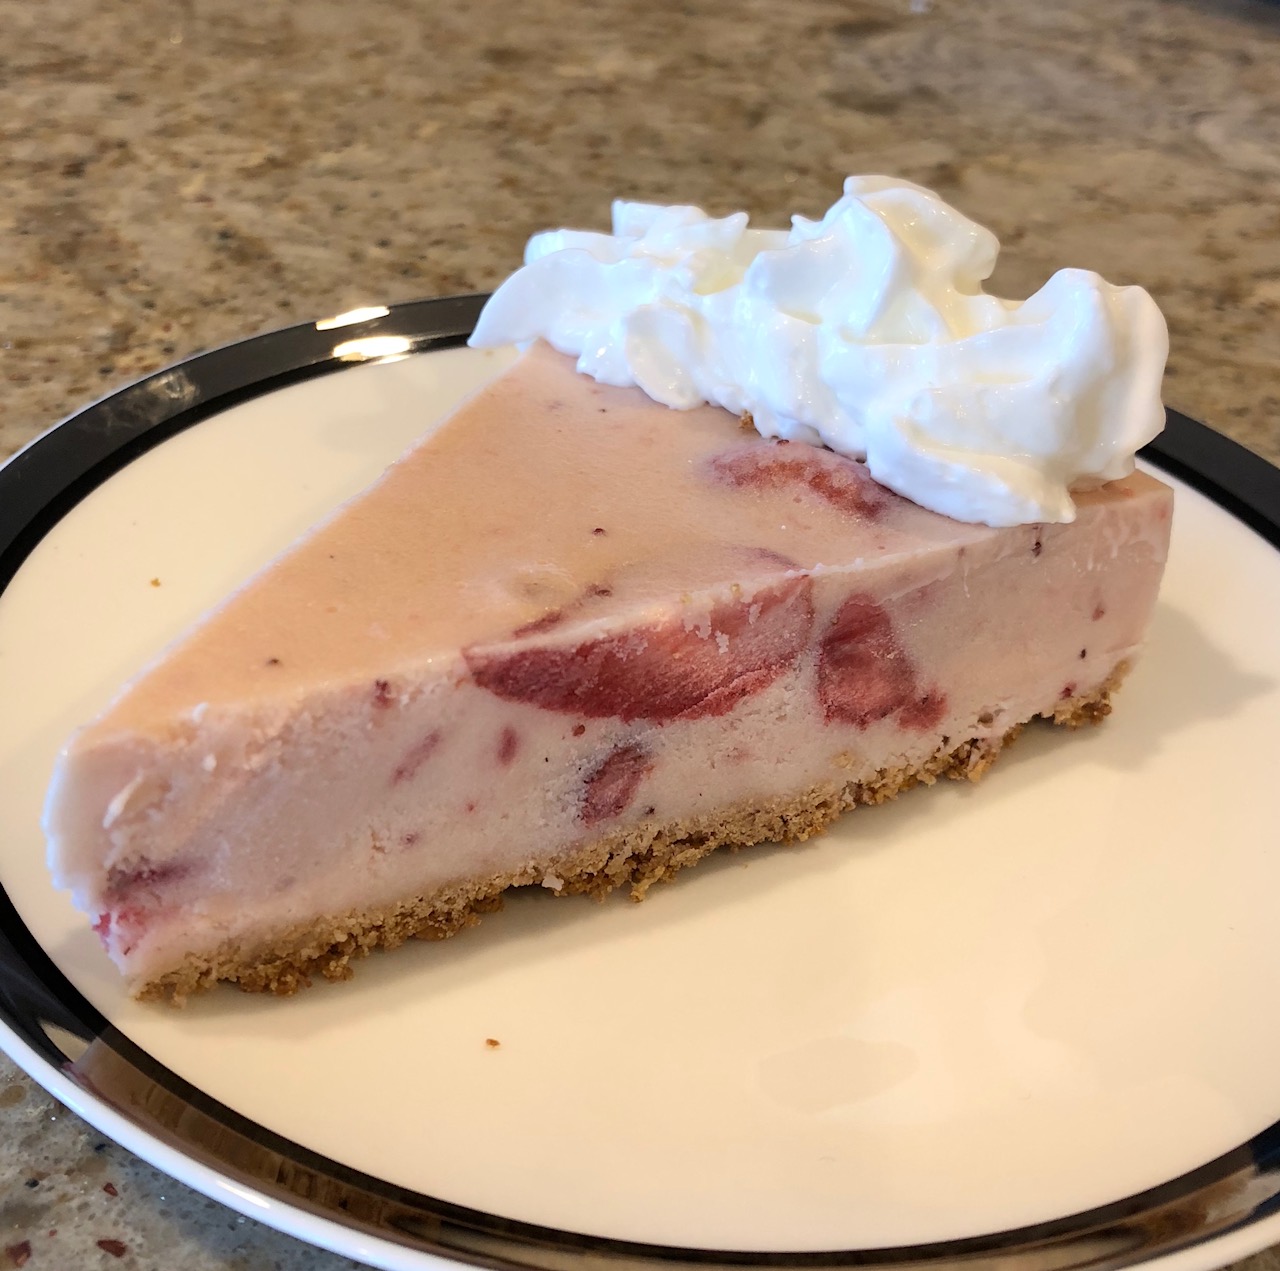 <p>A scrumptious, summery frozen dessert made with cheesecake pudding, strawberry ice cream, and loads of sweet sliced strawberries. Home cook Teresa Stewart thought this dessert was excellent: "I am a strawberry lover so I topped it with strawberries also!"</p>
                          